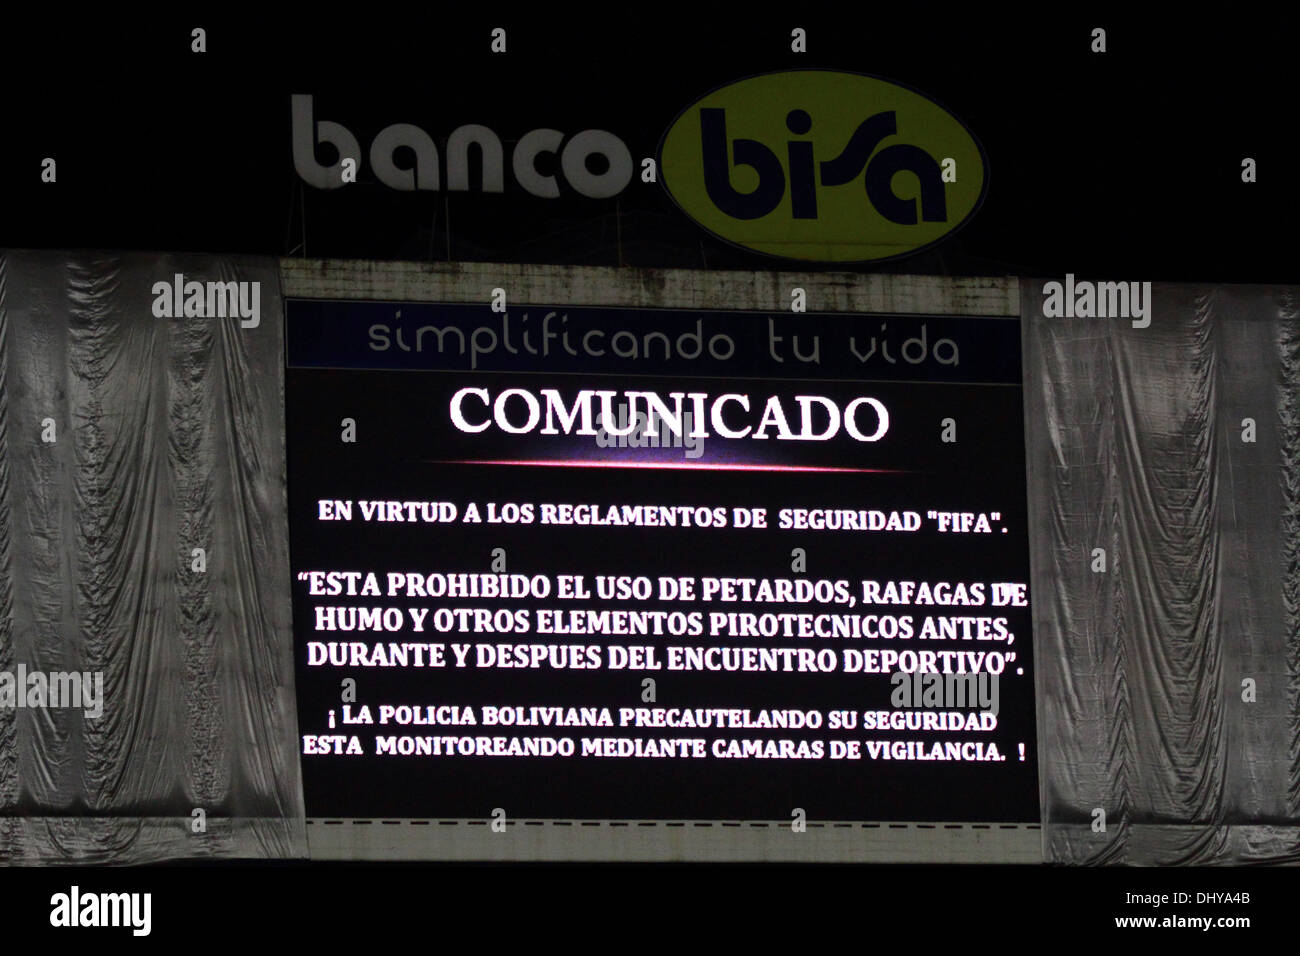 Message on stadium scoreboard in Spanish banning the use of flares and pyrotechnics during football matches, La Paz , Bolivia Stock Photo